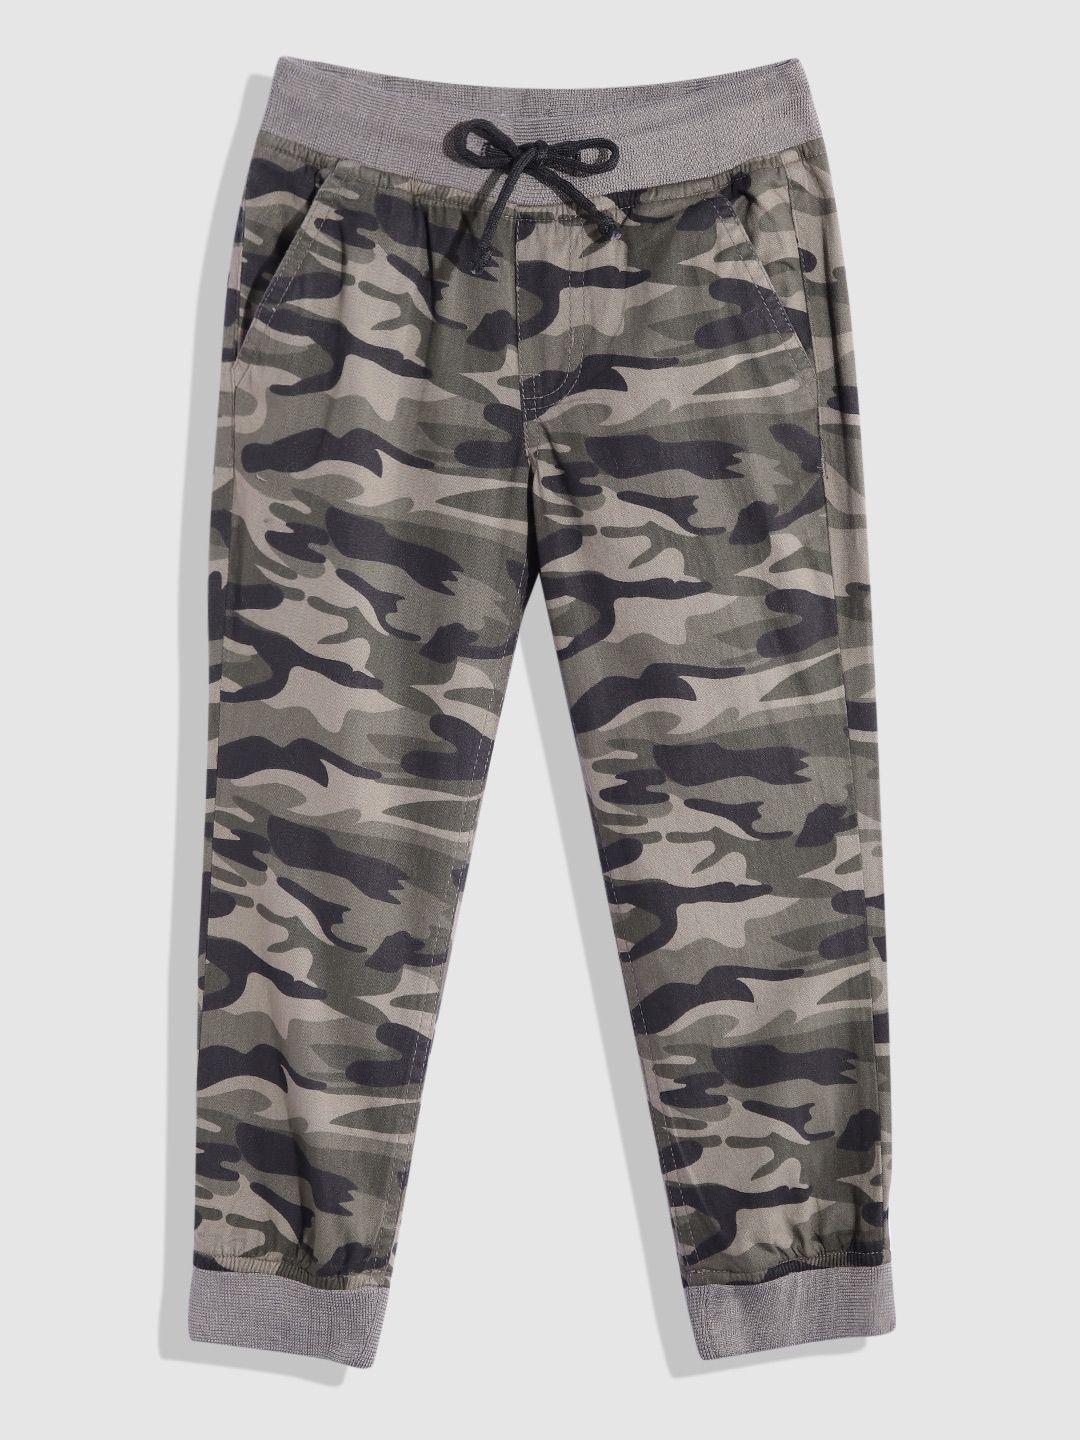 yk-boys-camouflage-printed-slim-fit-pure-cotton-joggers